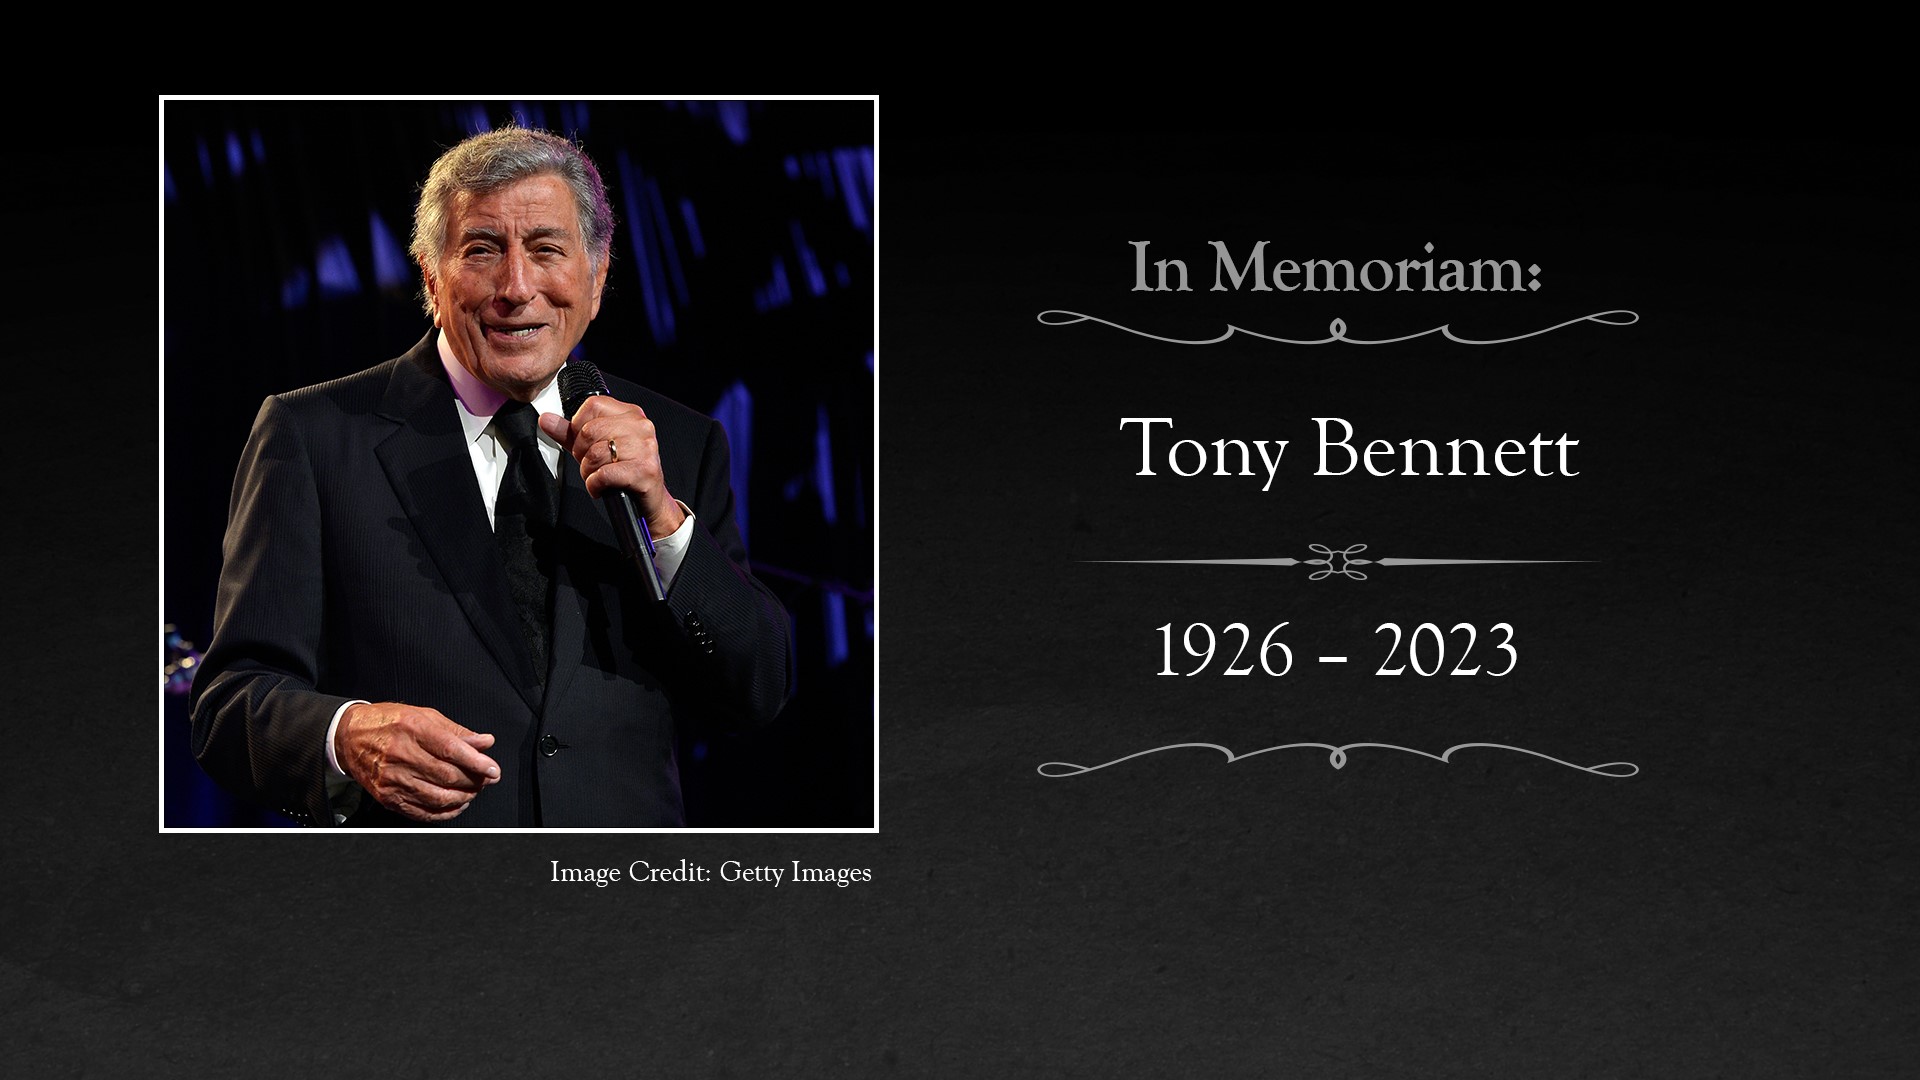 Tony Bennett passed away Friday, just two weeks shy of his 97th birthday.